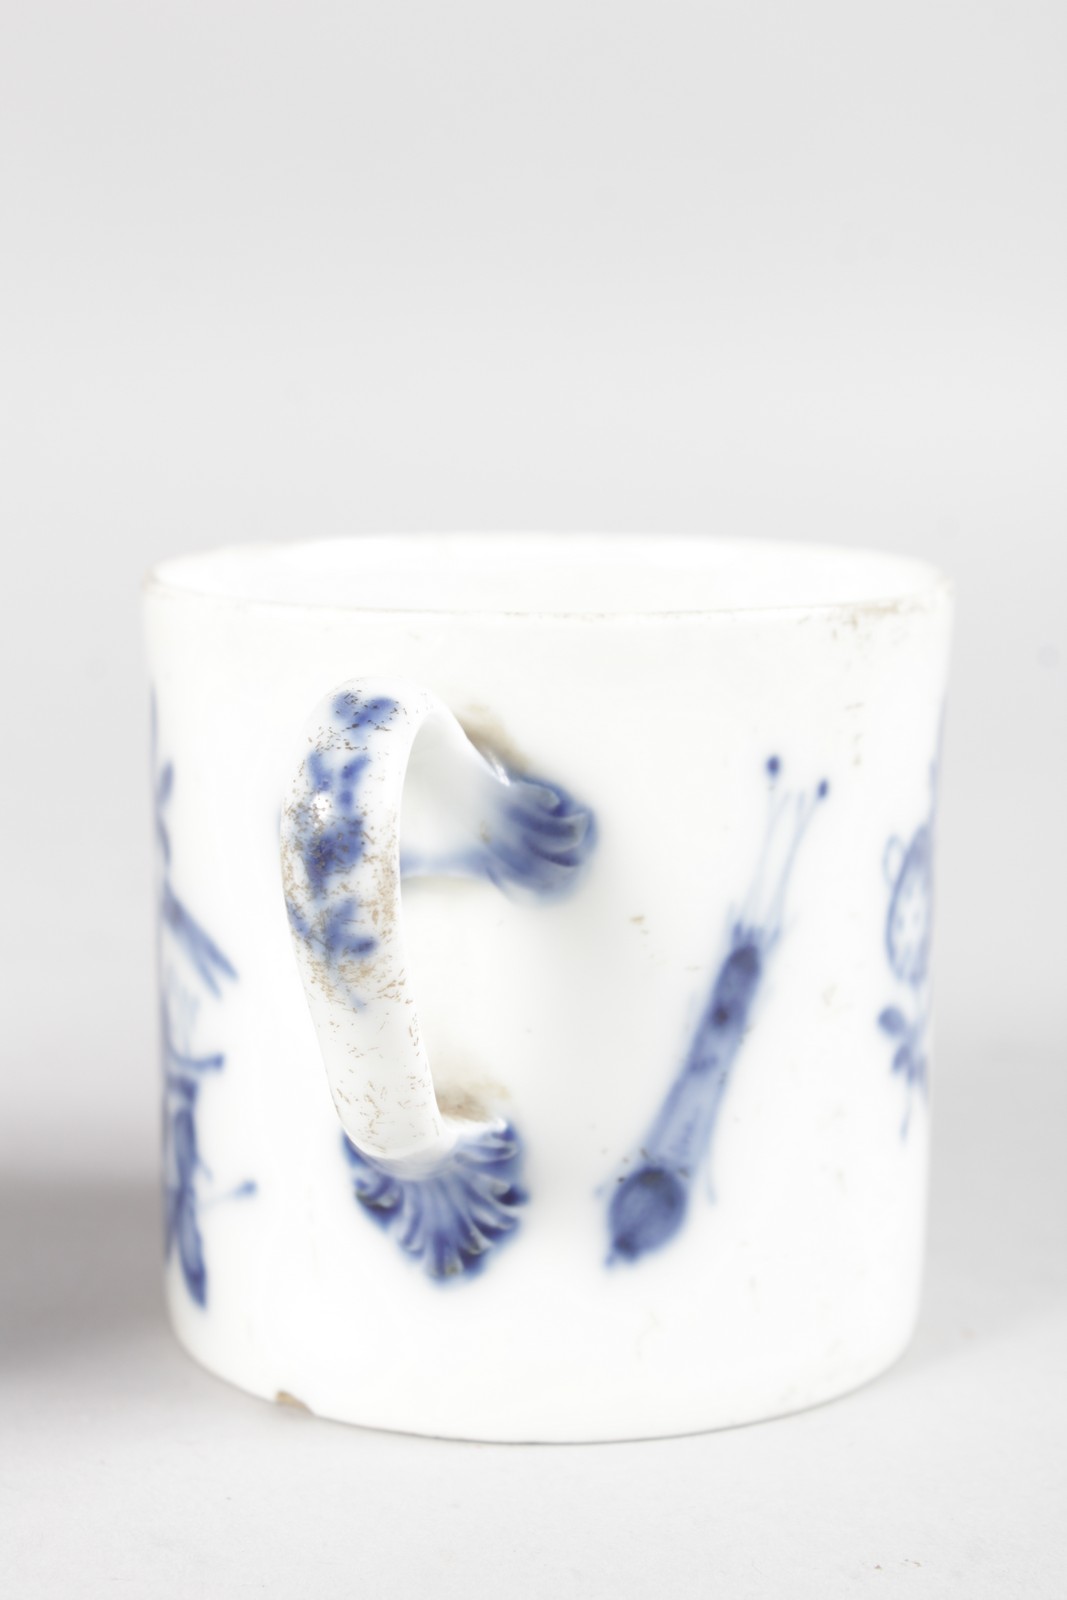 AN 18TH CENTURY MEISSEN BLUE AND WHITE CUP AND SAUCER. - Image 5 of 8